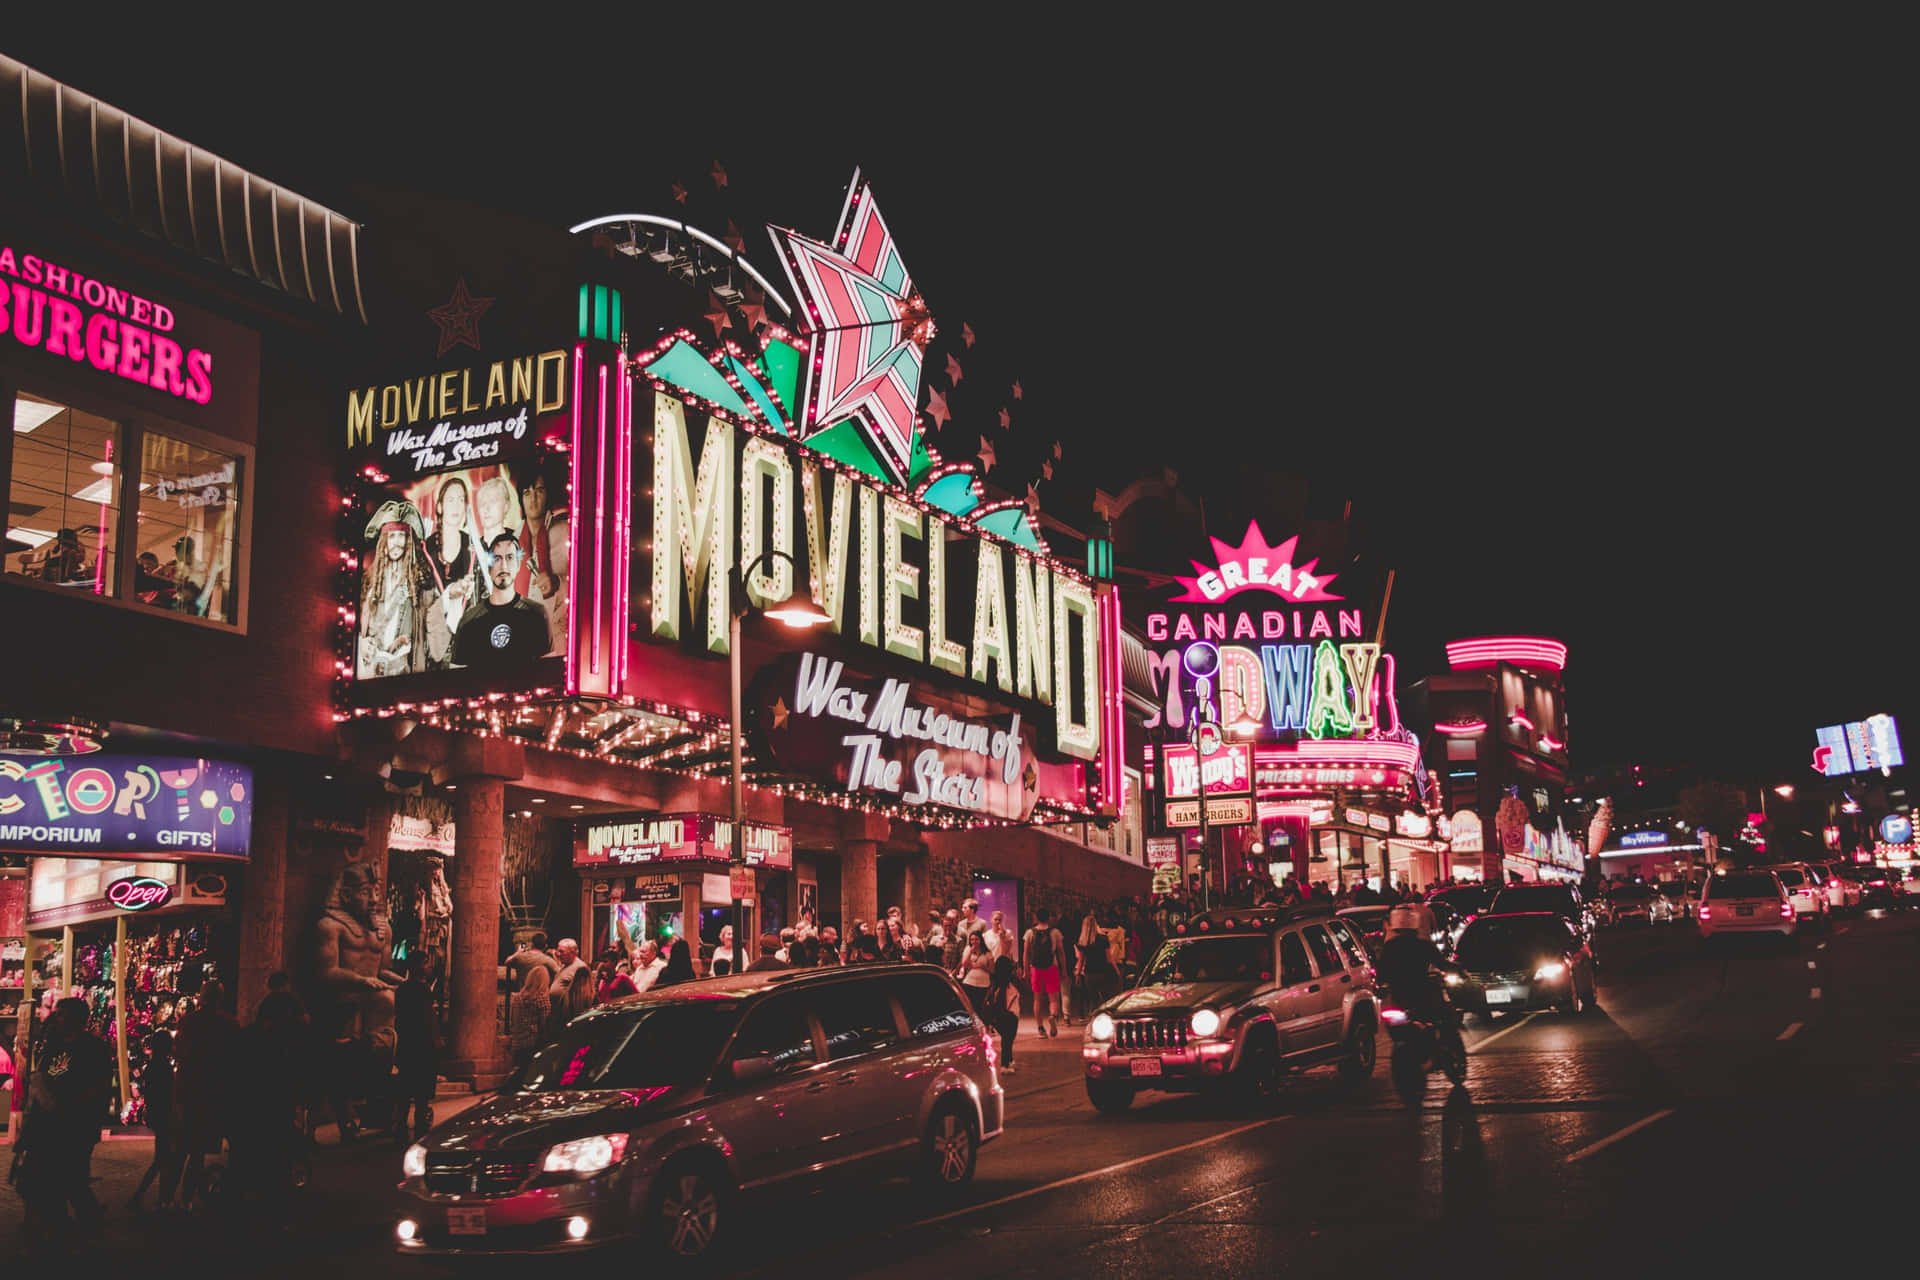 Movieland Wax House Canada Movie Theater Background